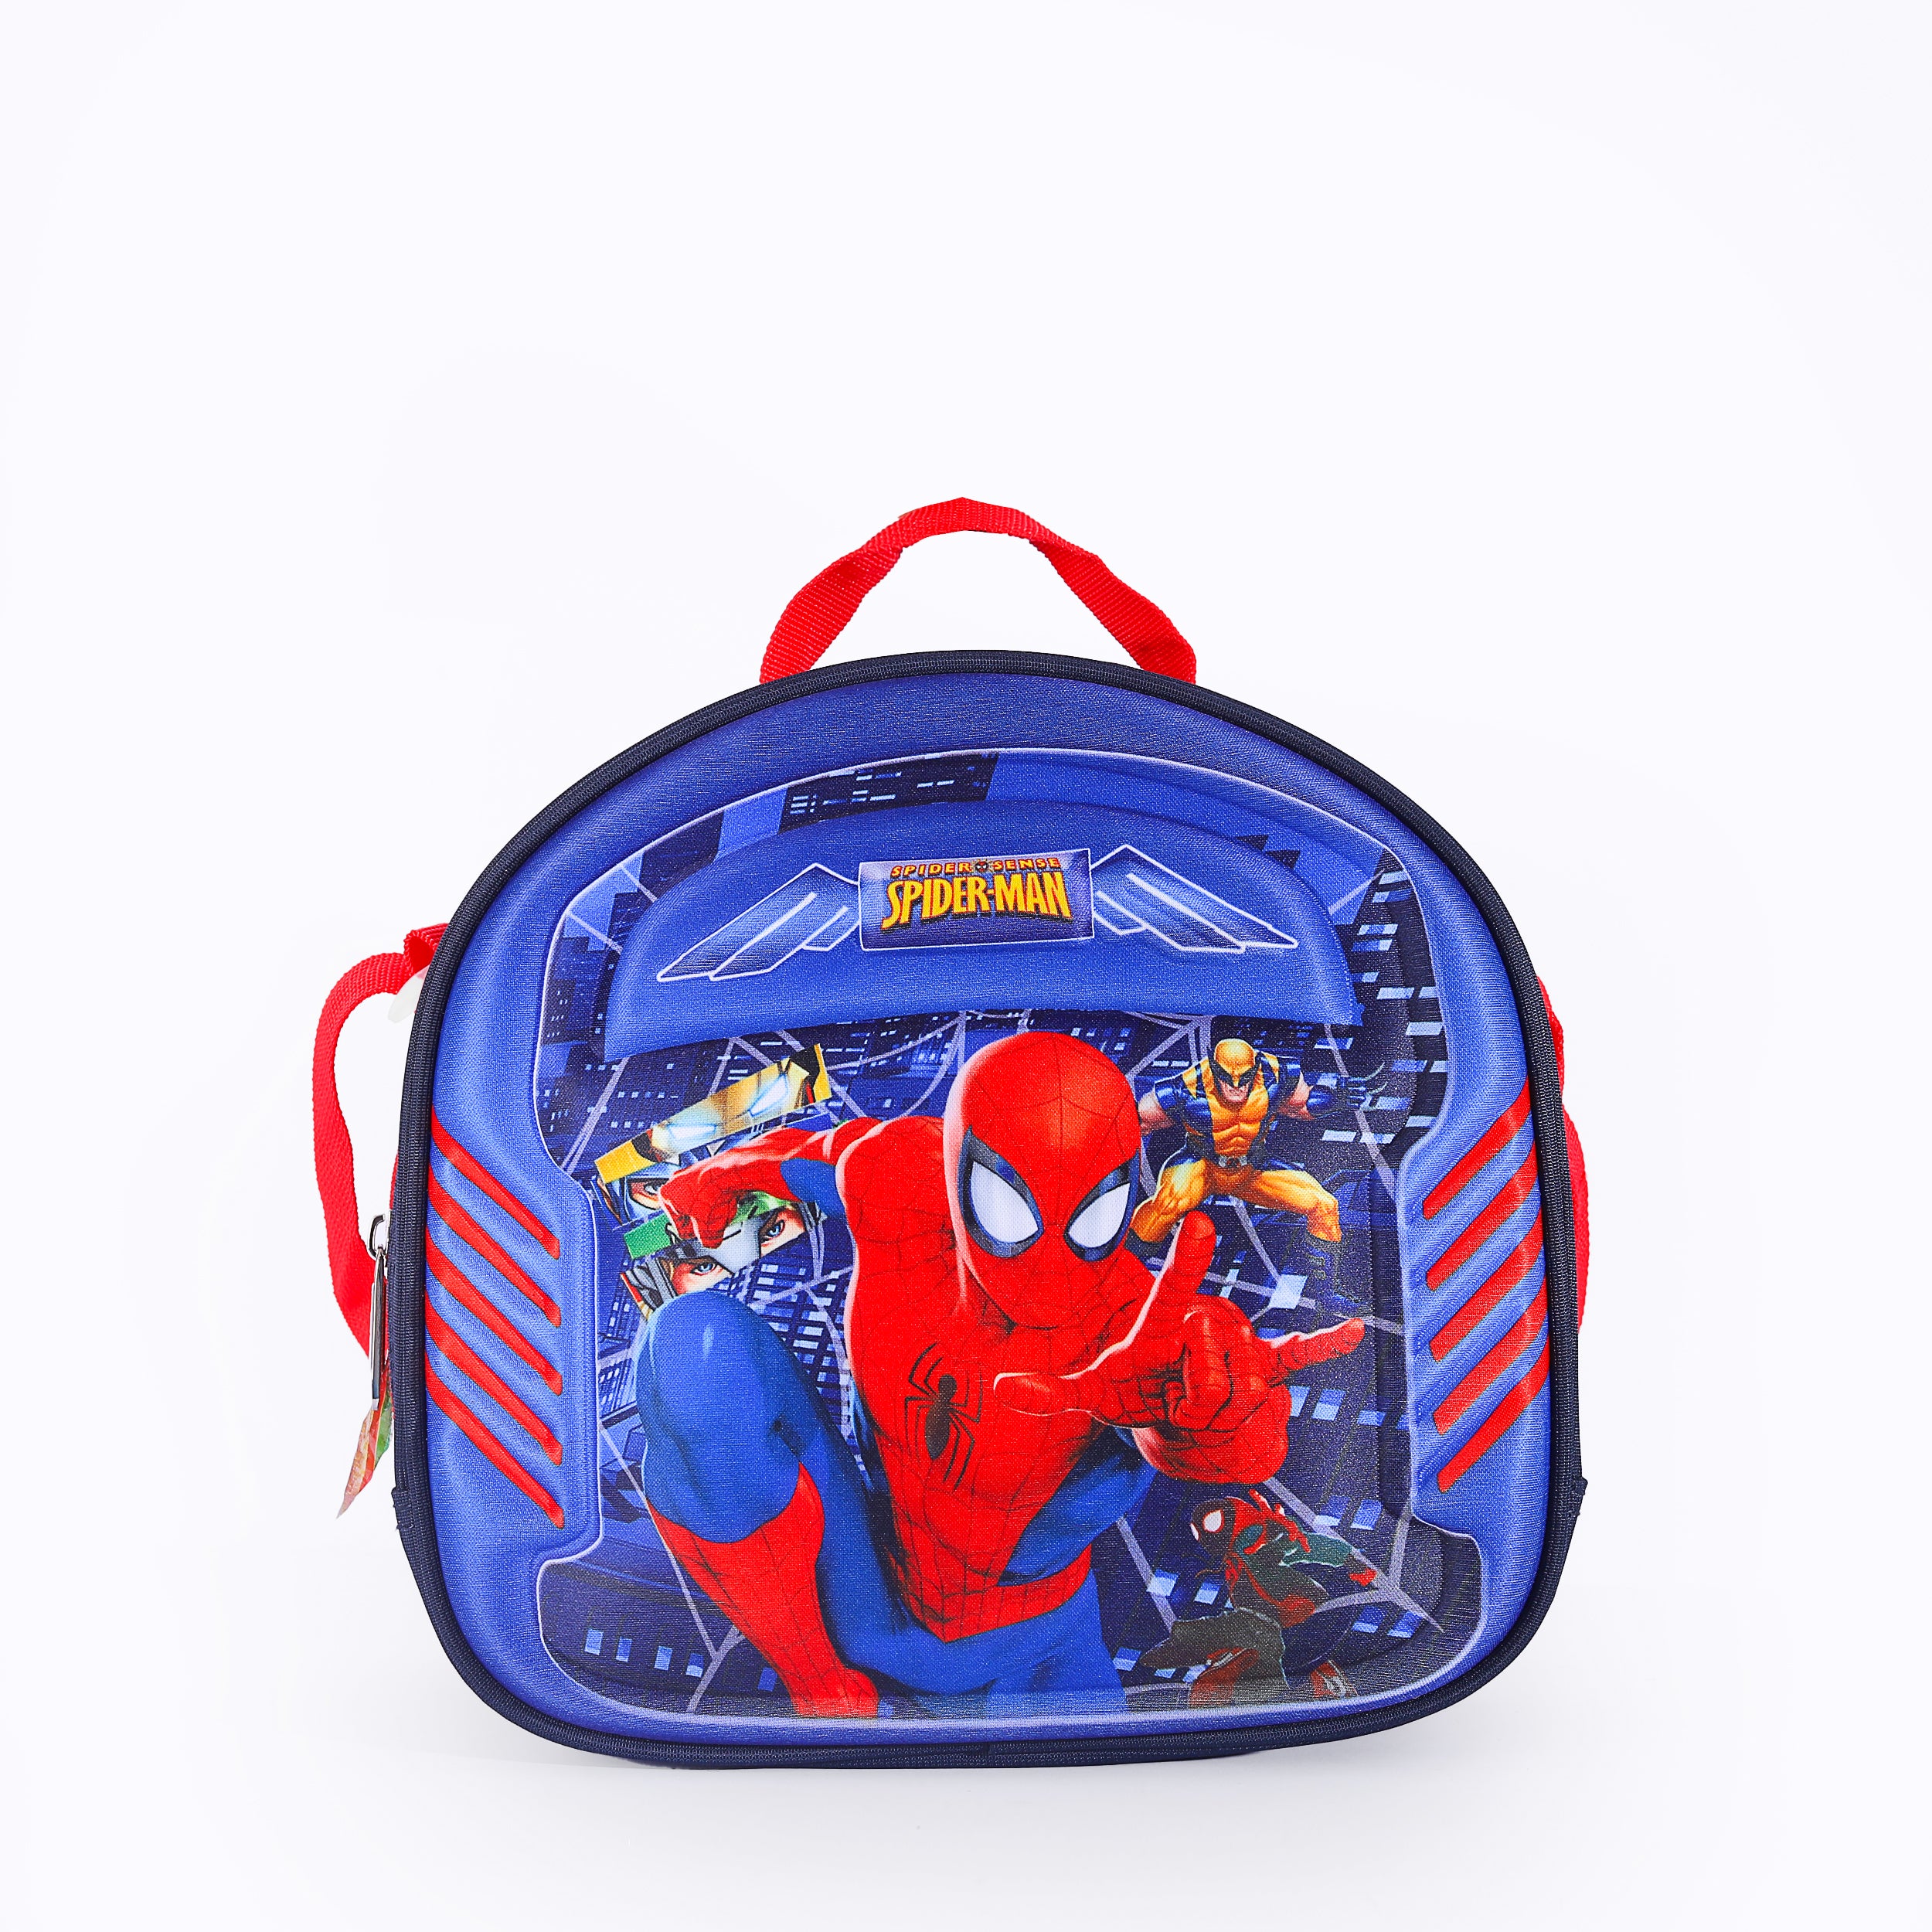 Spider Man Lunch Bag For Boys